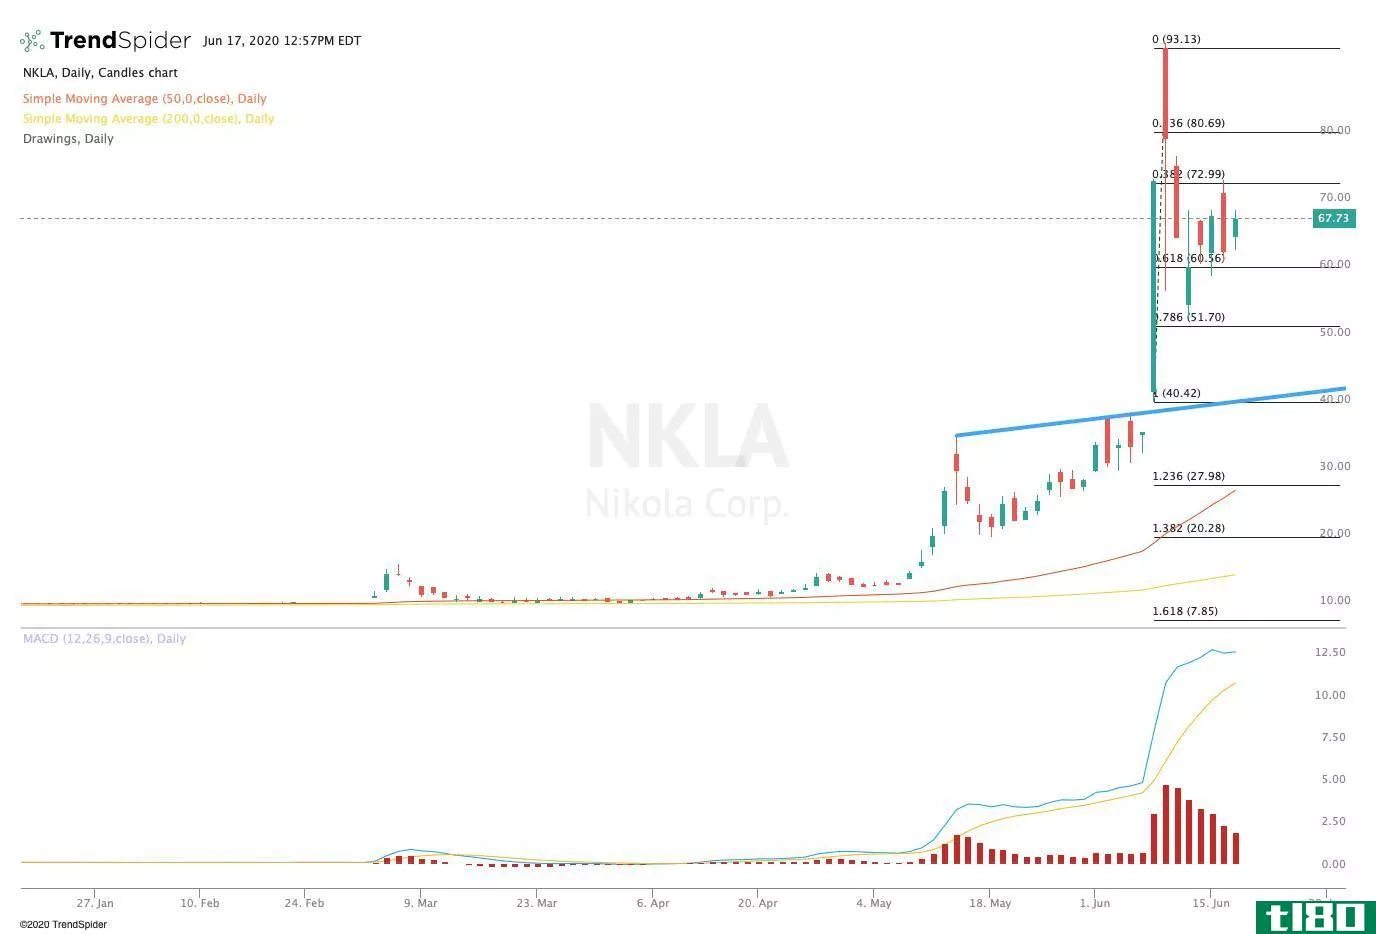 Chart showing the share price performance of Nikola Corporation (NKLA)